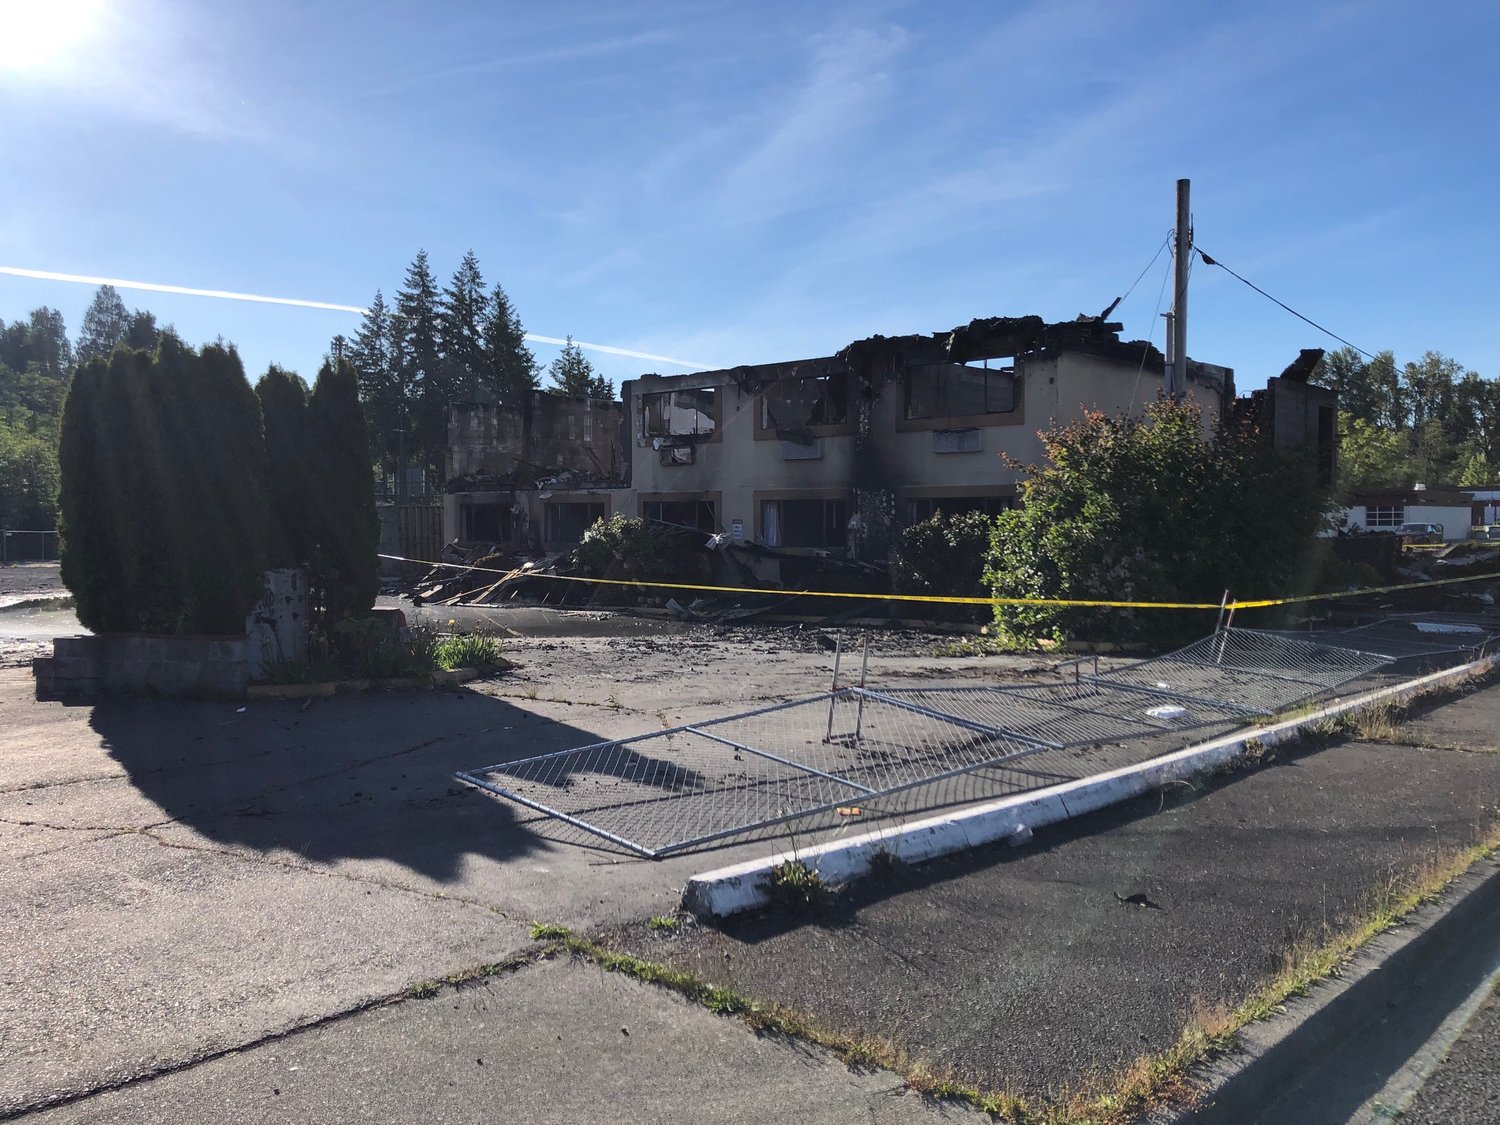 This is another view of the north building at the former Quality Inn at 1211 Quince St. SE in Olympia. The photo was taken Sun., May 30, 2021